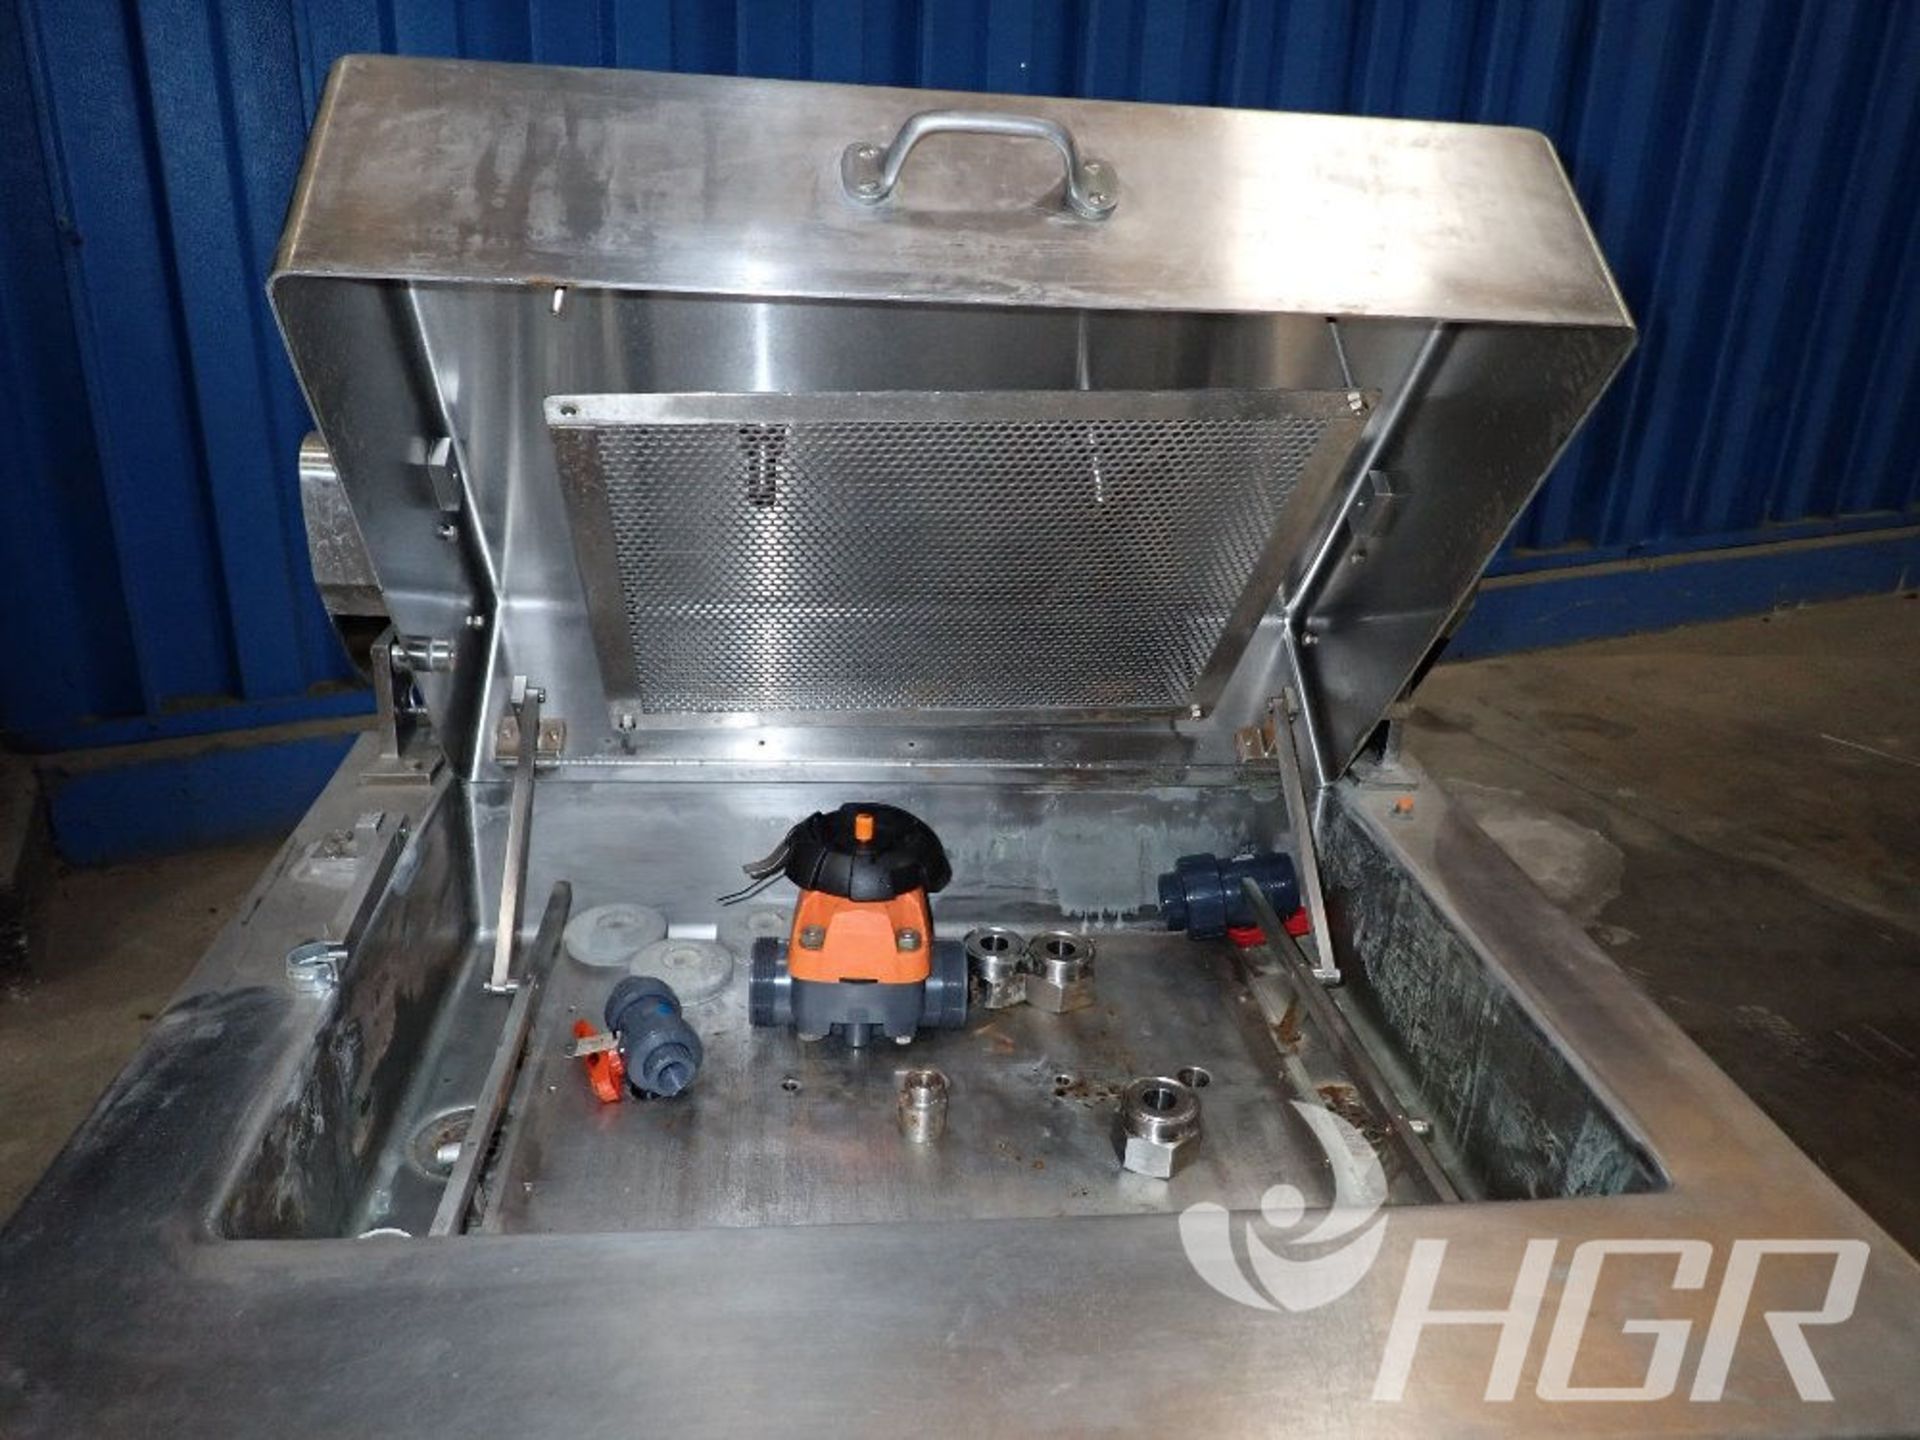 COZZOLI CLEANING STATION, Model n/a, Date: n/a; s/n GW24-242, Approx. Capacity: 21X15, Power: n/a, - Image 7 of 16